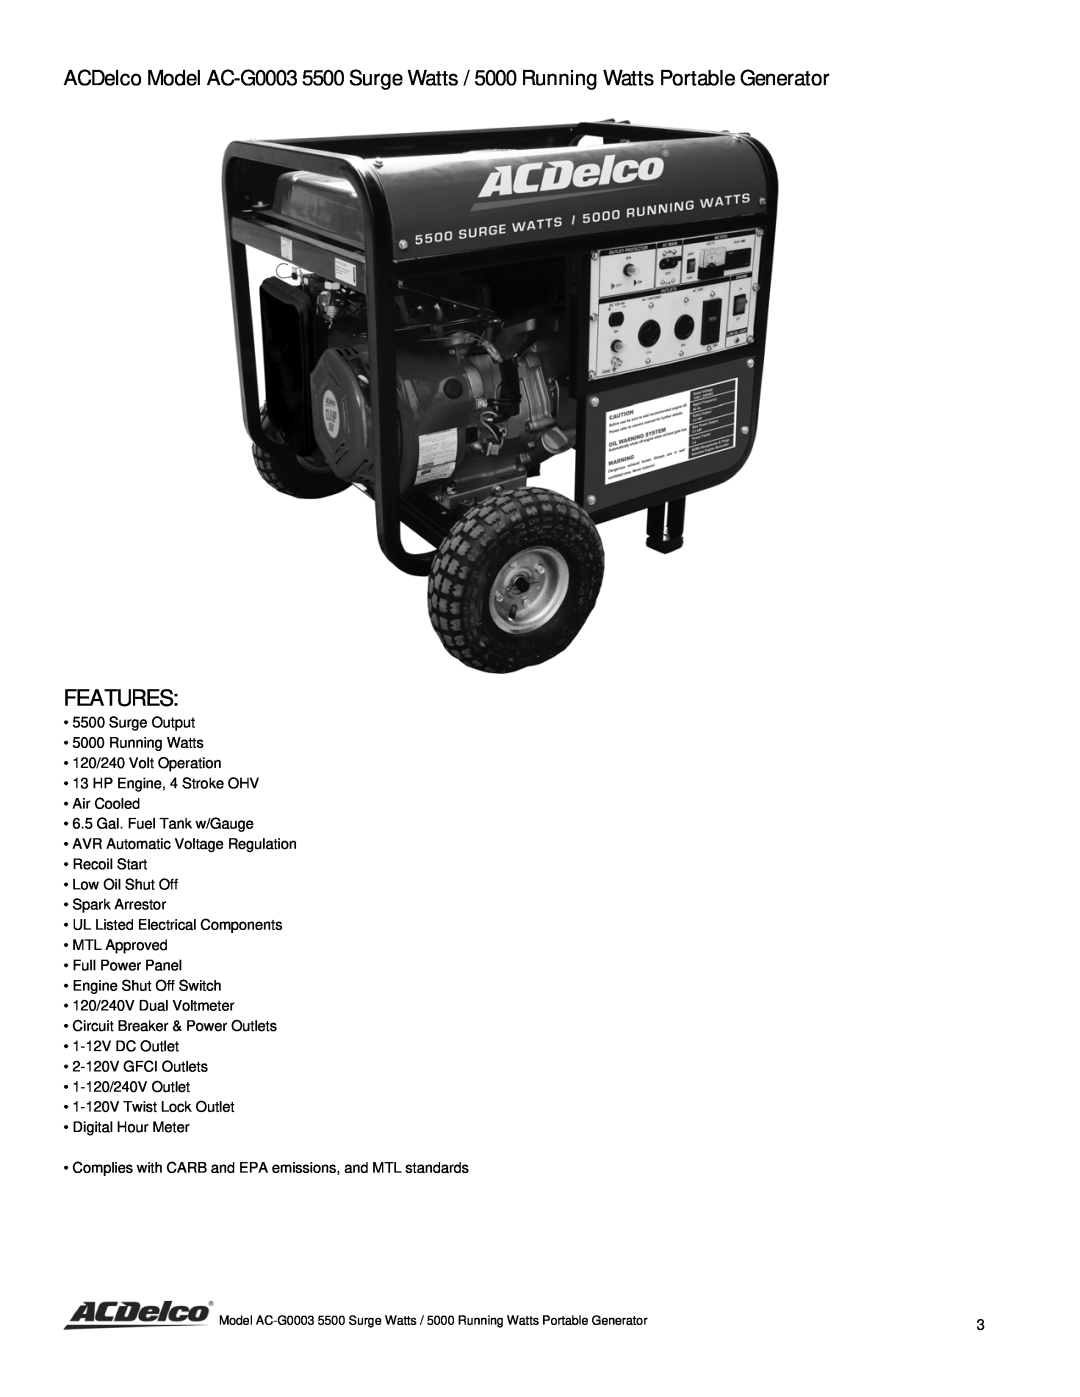 ACDelco AC-G0003 instruction manual Features 